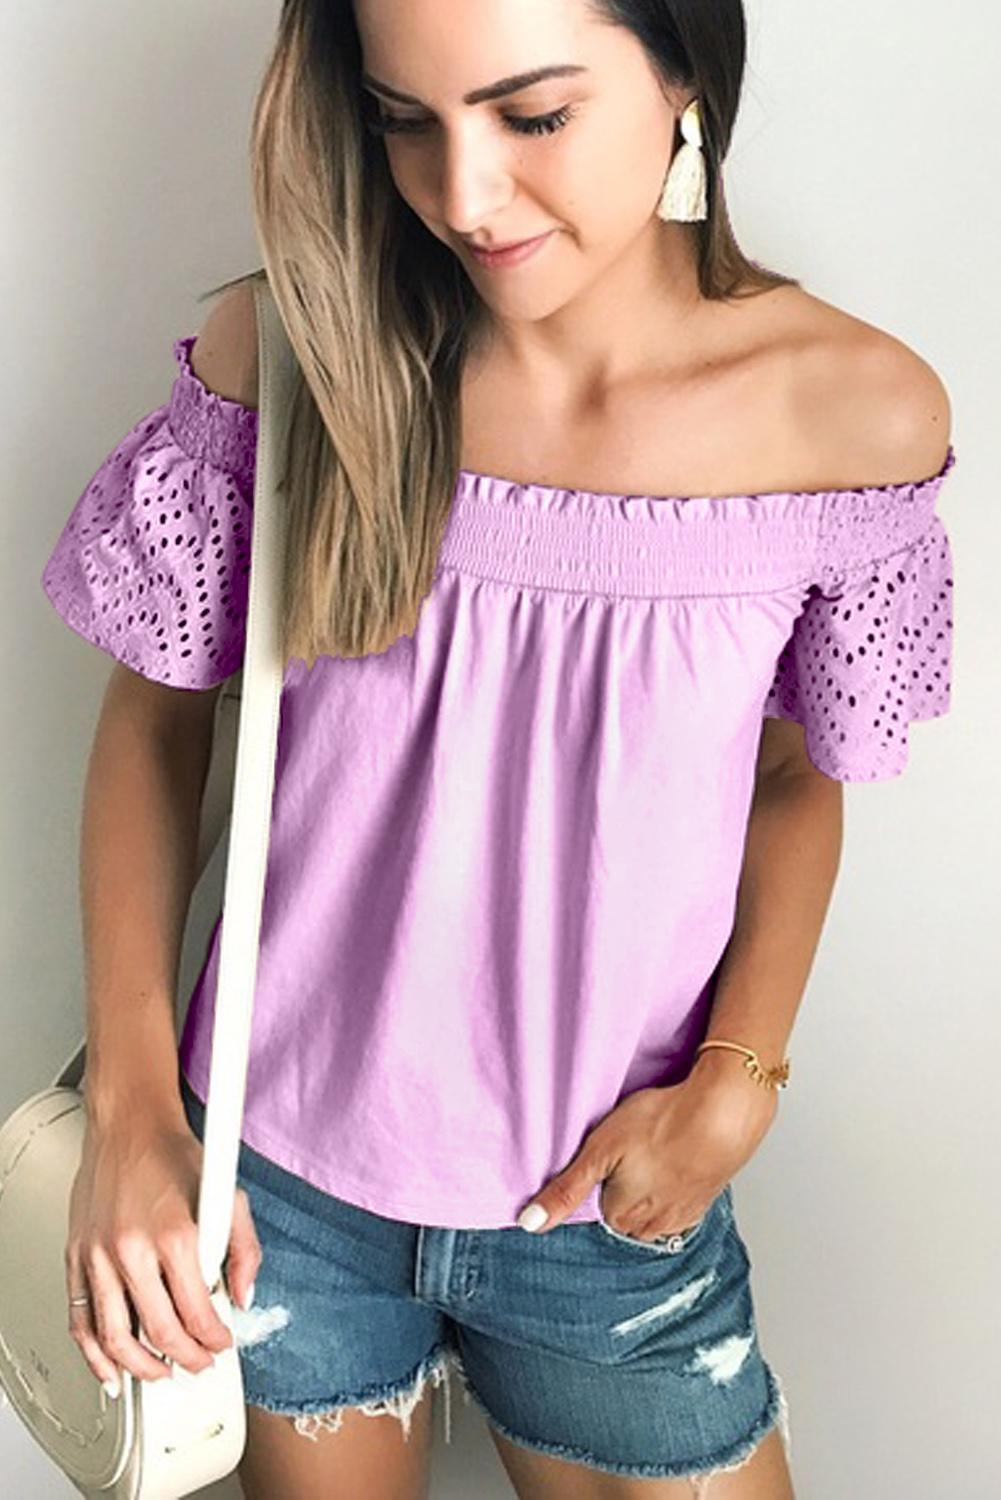 $ 18.99 - Asvivid Womens Off the Shoulder Short Sleeve Tops Hollow Out ...